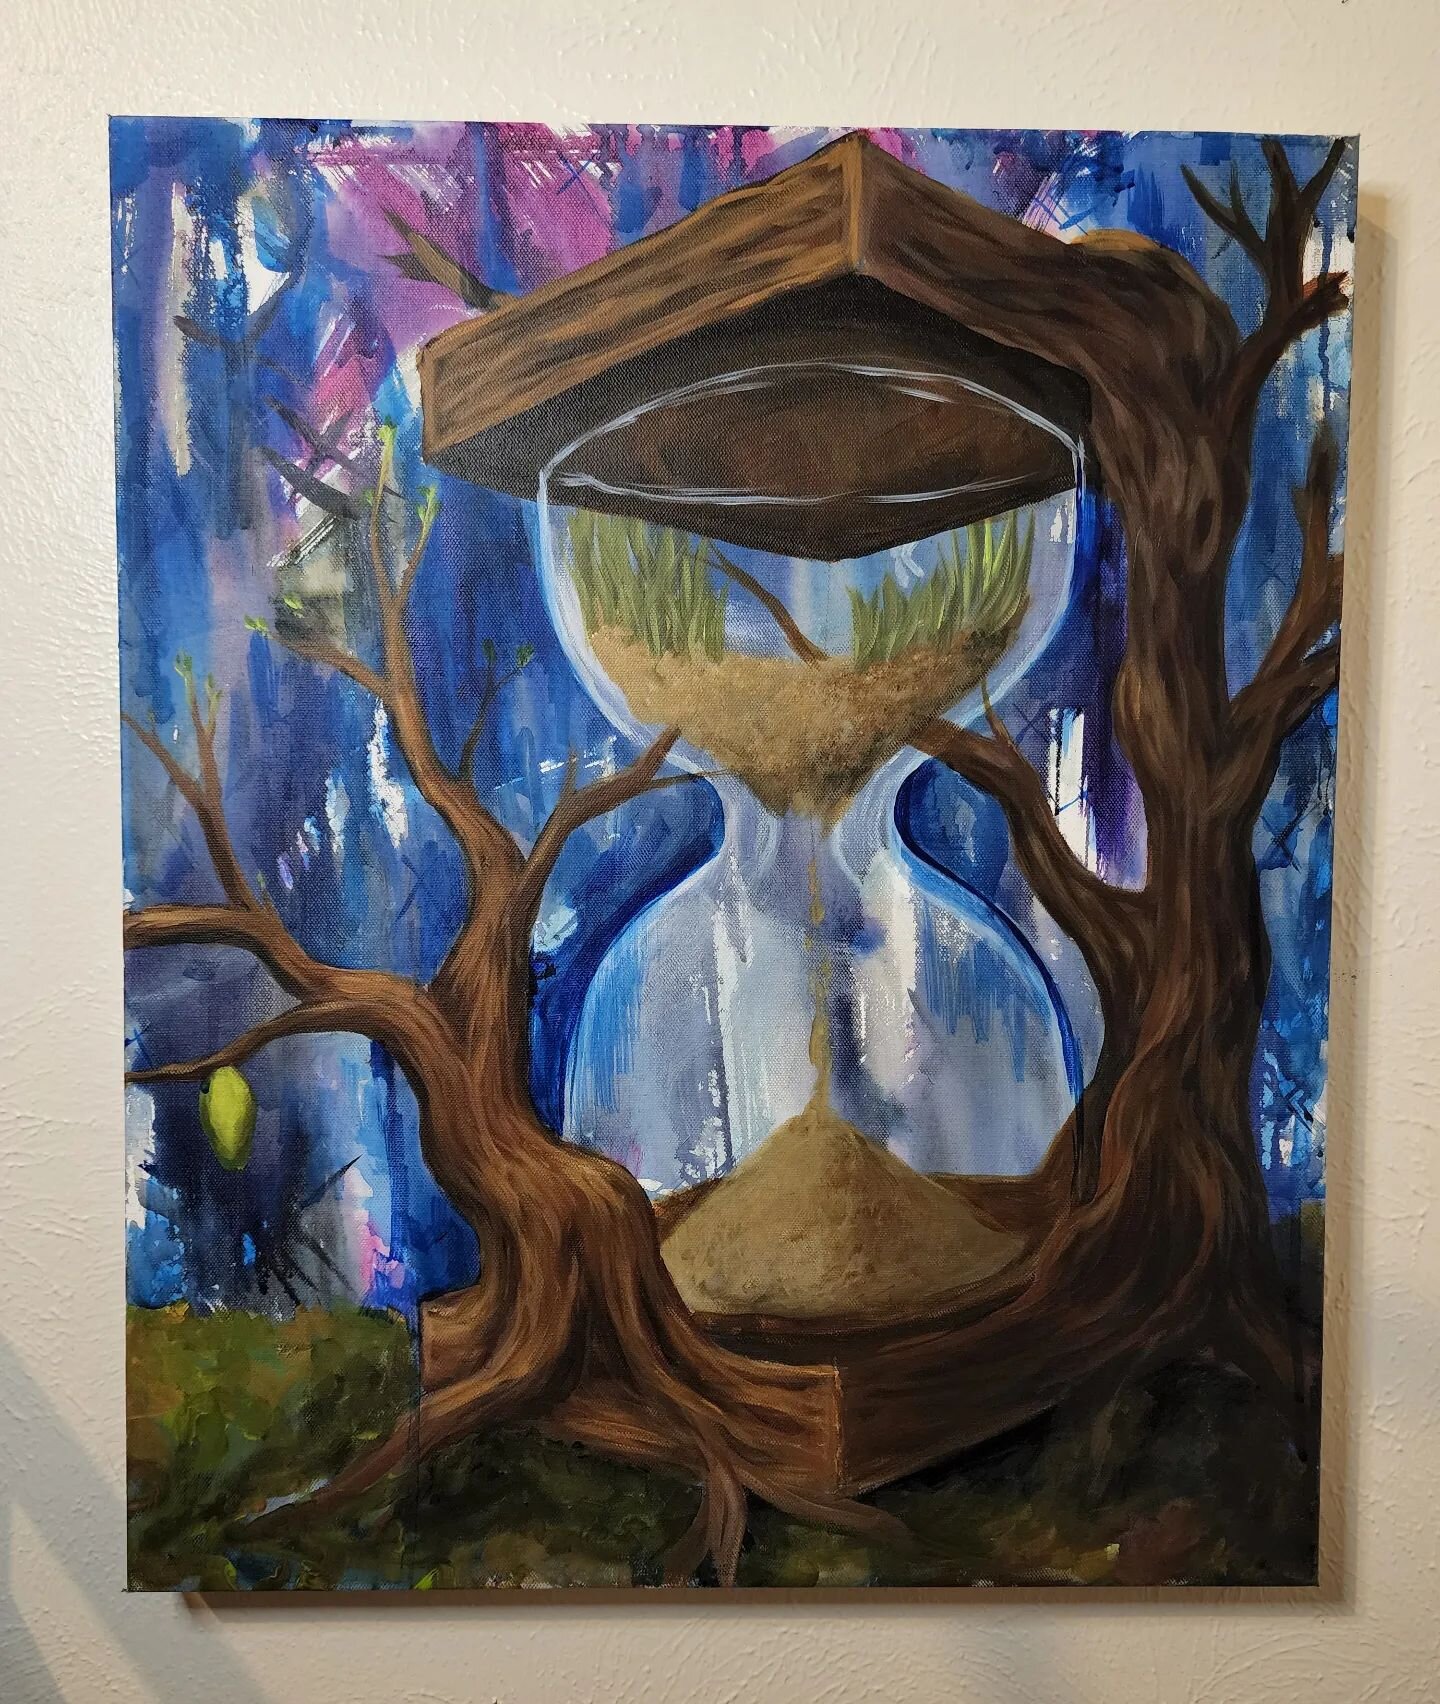 I haven't done a #wipwednesday for a while, so I thought I would share this current painting.
Let me know what you think

#surreal #denverart #workinprogress #wip #artprocess #newart #painting #time